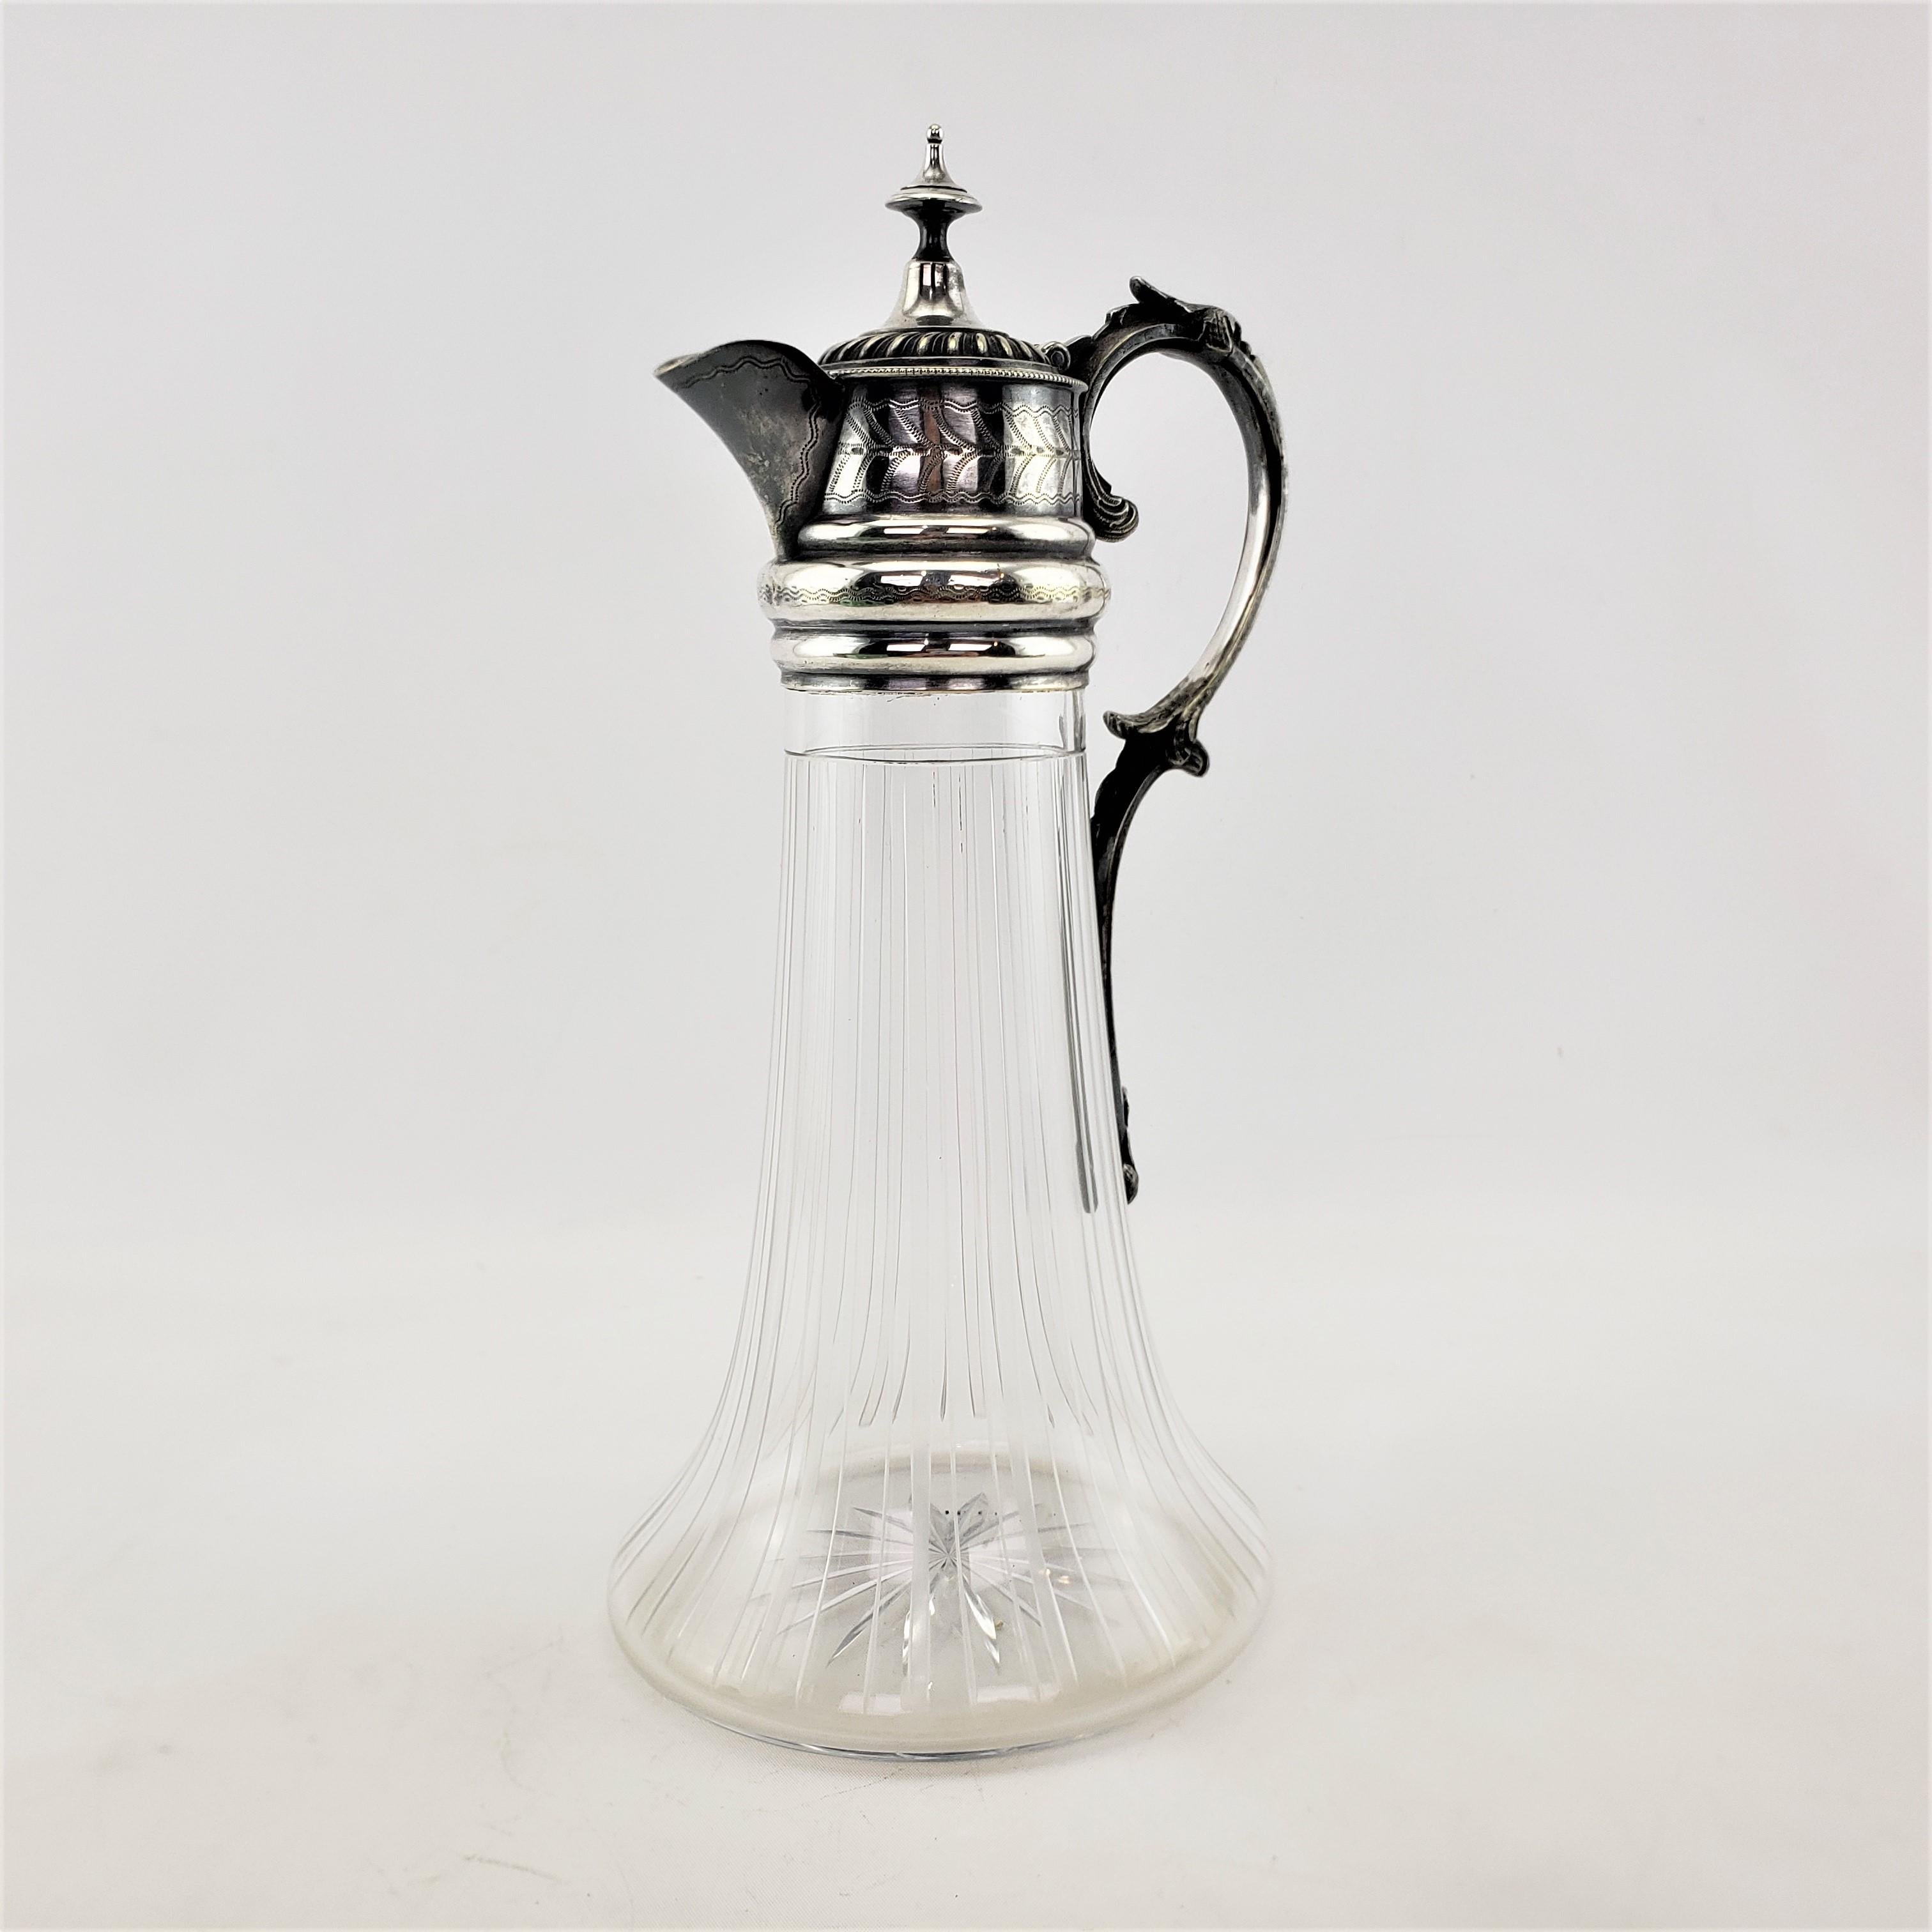 This antique cut crystal and silver plate mounted claret jug is unsigned, but presumed to have originated from England and dates to approximately 1920 and done in the late Victorian style. The claret jug is done with a tapered crystal base with cut